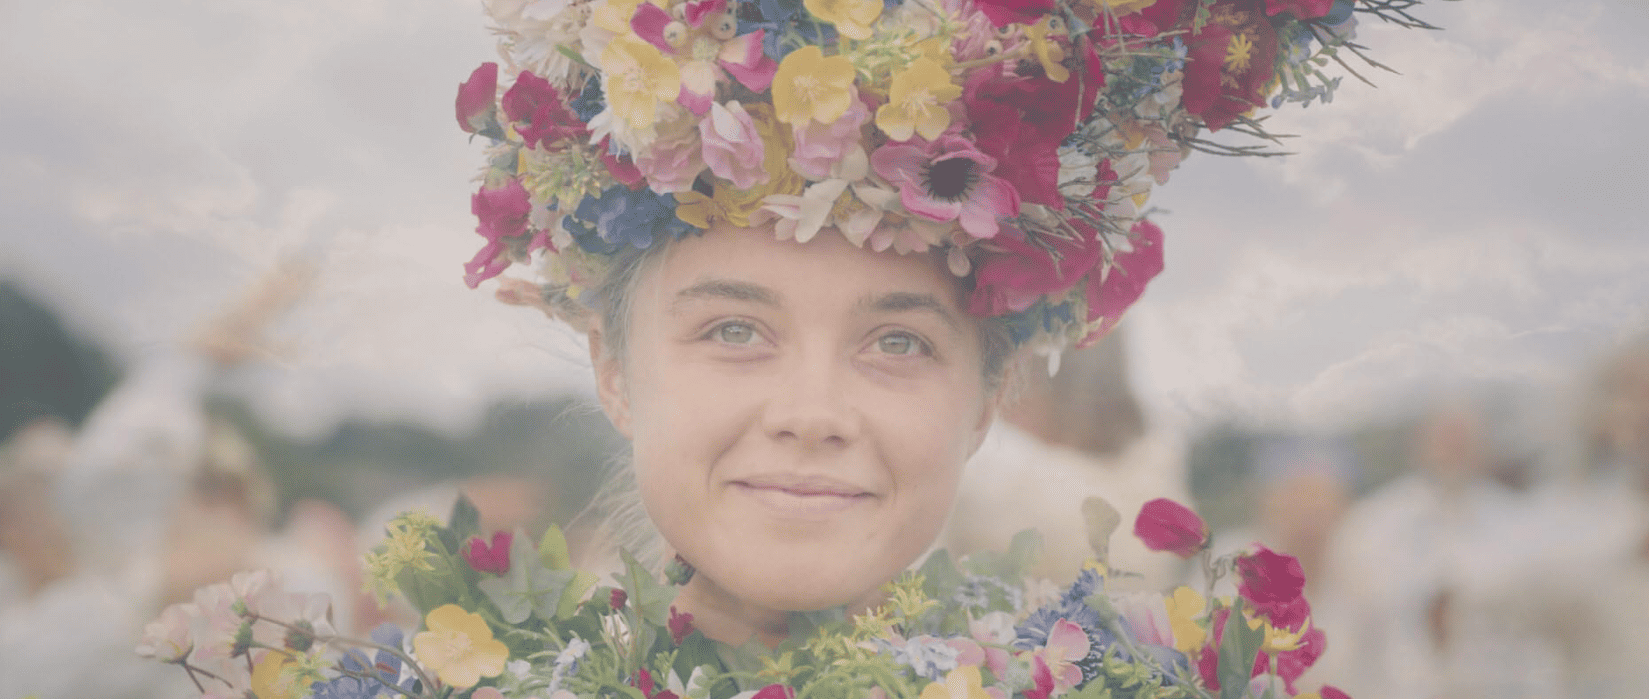 A woman adorned in flowers smiles in this image from A24.